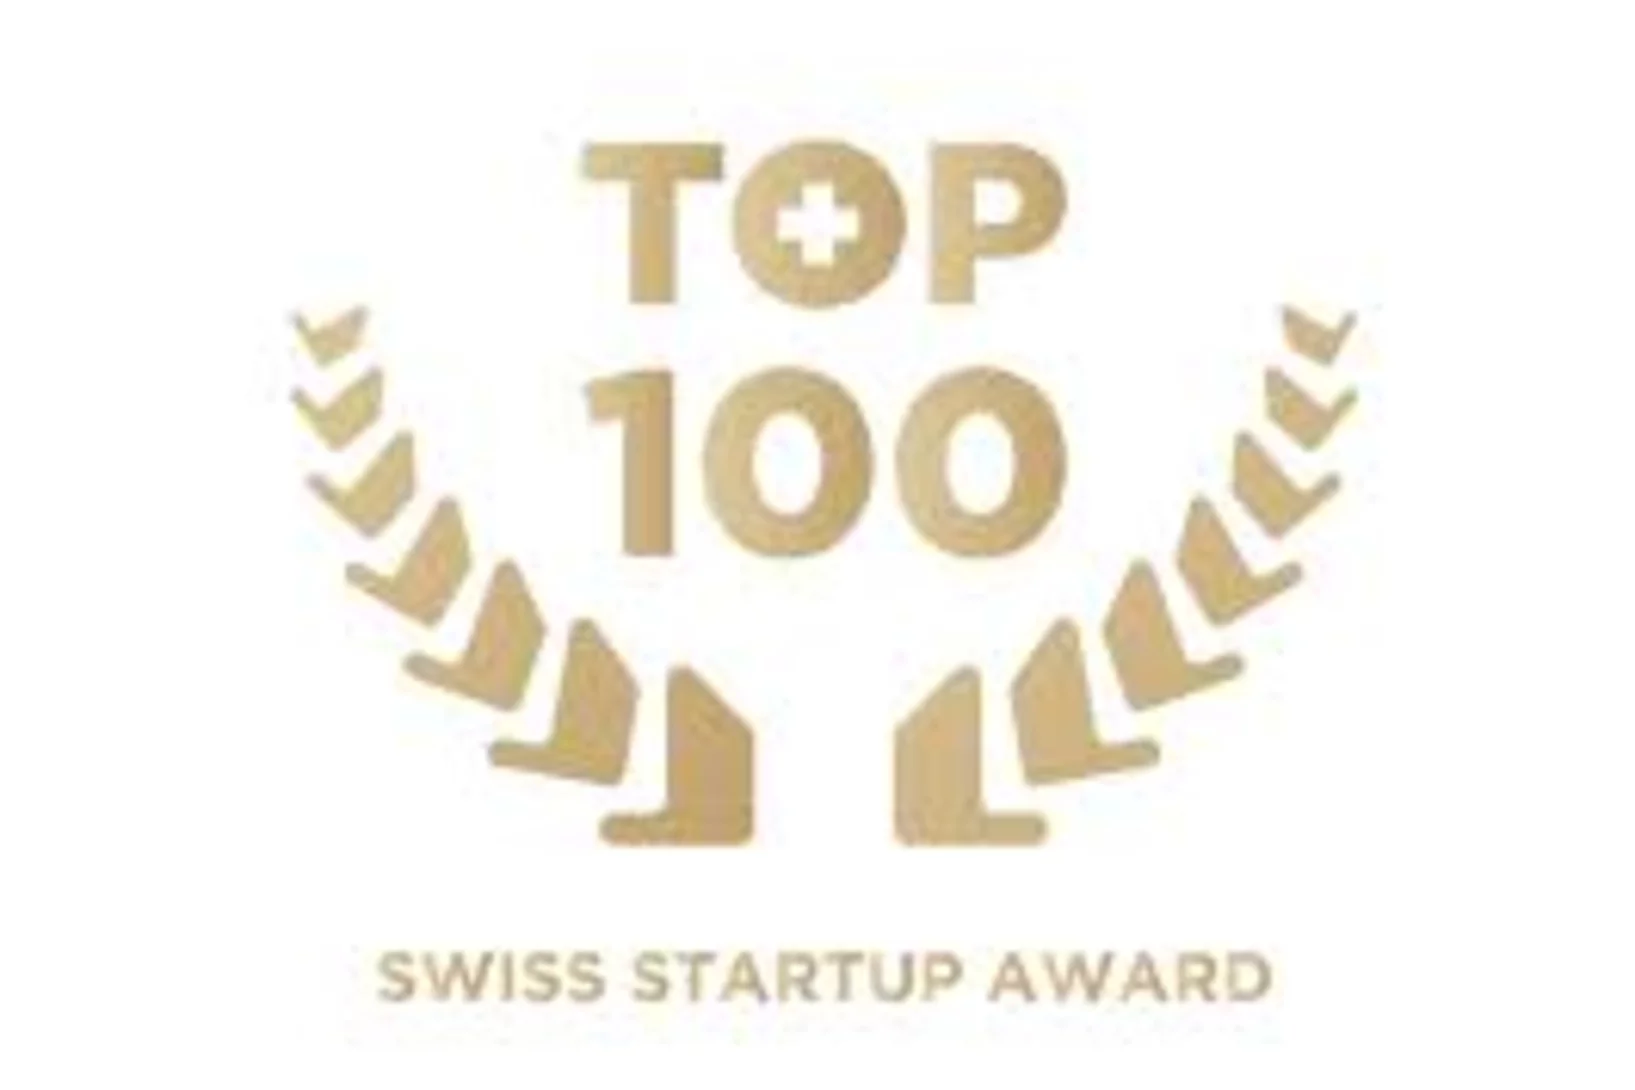 Araris made it to TOP14 in this year's edition of the TOP 100 Swiss Startup Award (source: https://www.top100startups.swiss/).